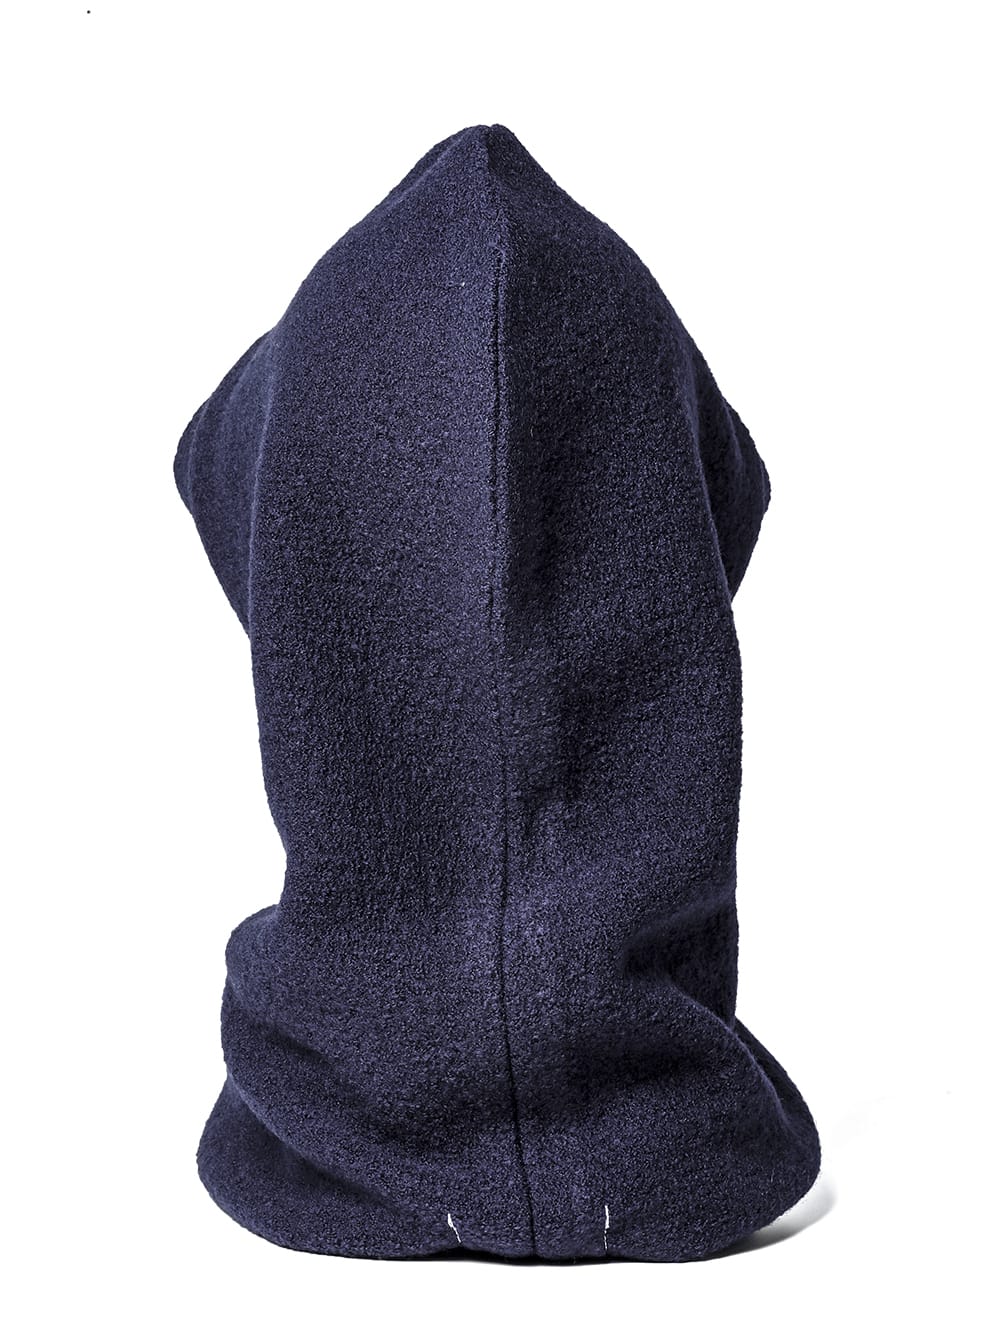 sa.0009AW23-midnight jersey balaclava. THE TWO OF US 2023 Autumn 